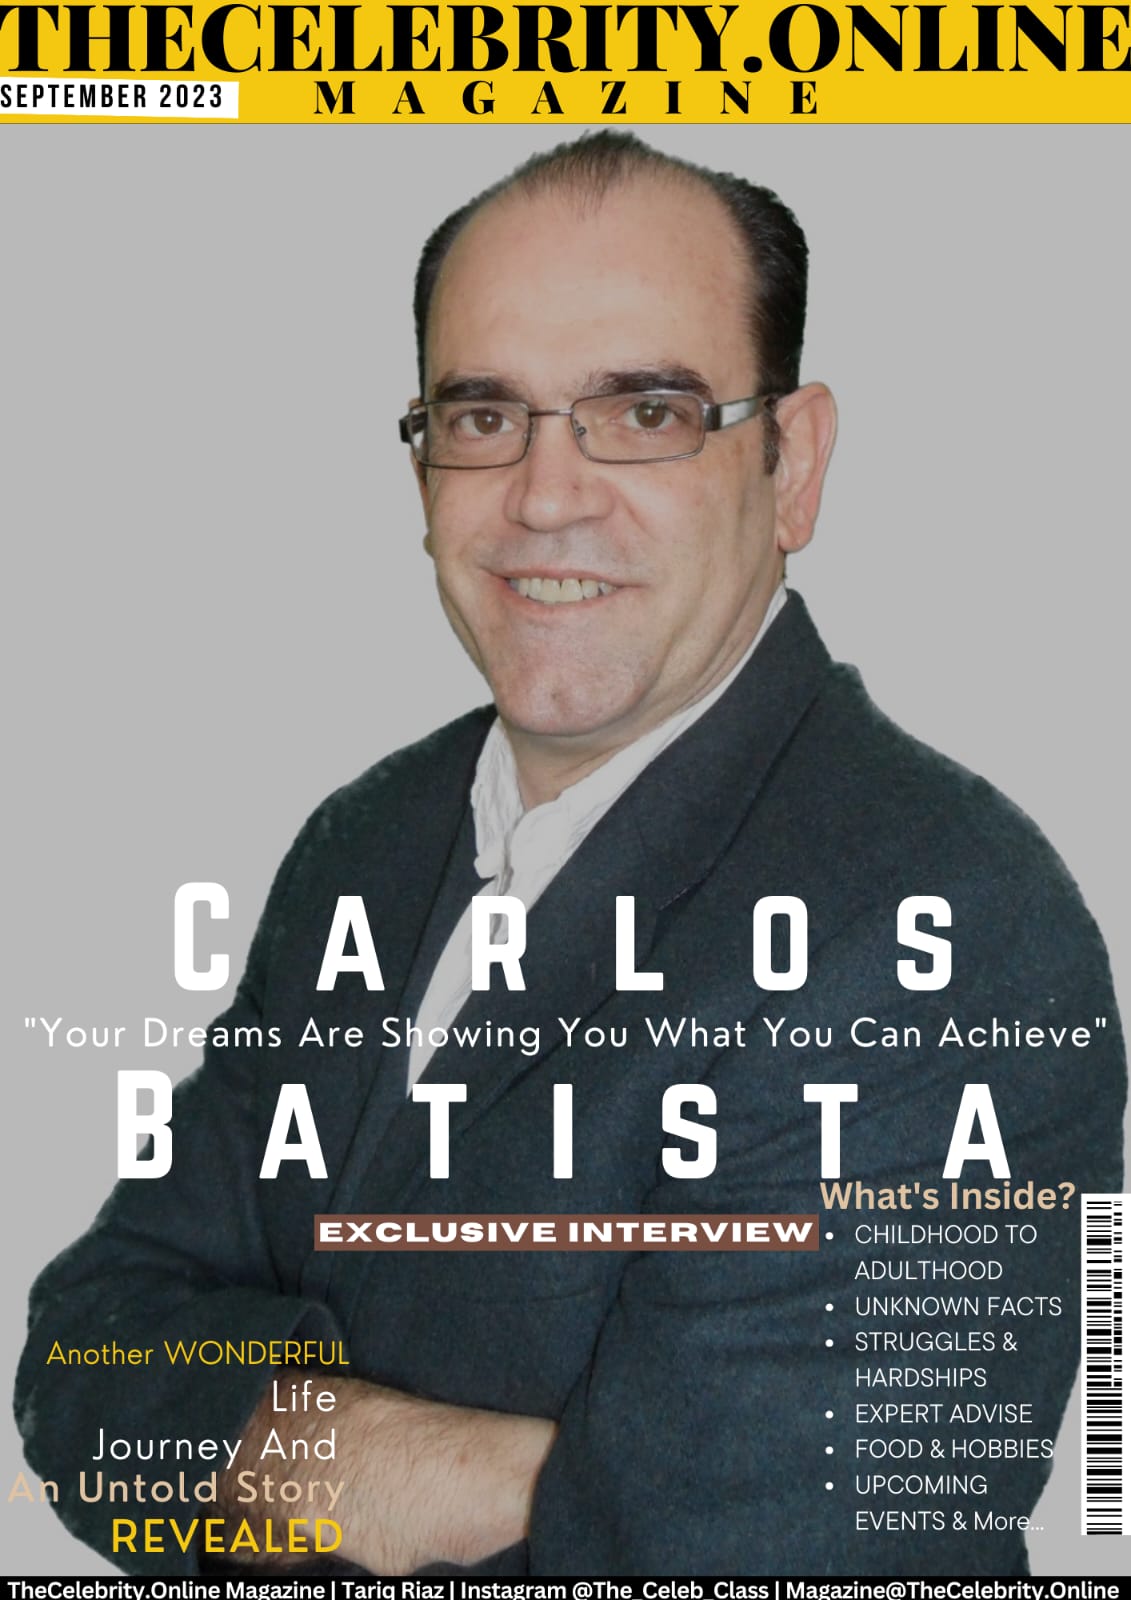 Carlos Batista Exclusive Interview – ‘Your Dreams Are Showing You What You Can Achieve If You Have The Courage To Follow Them’